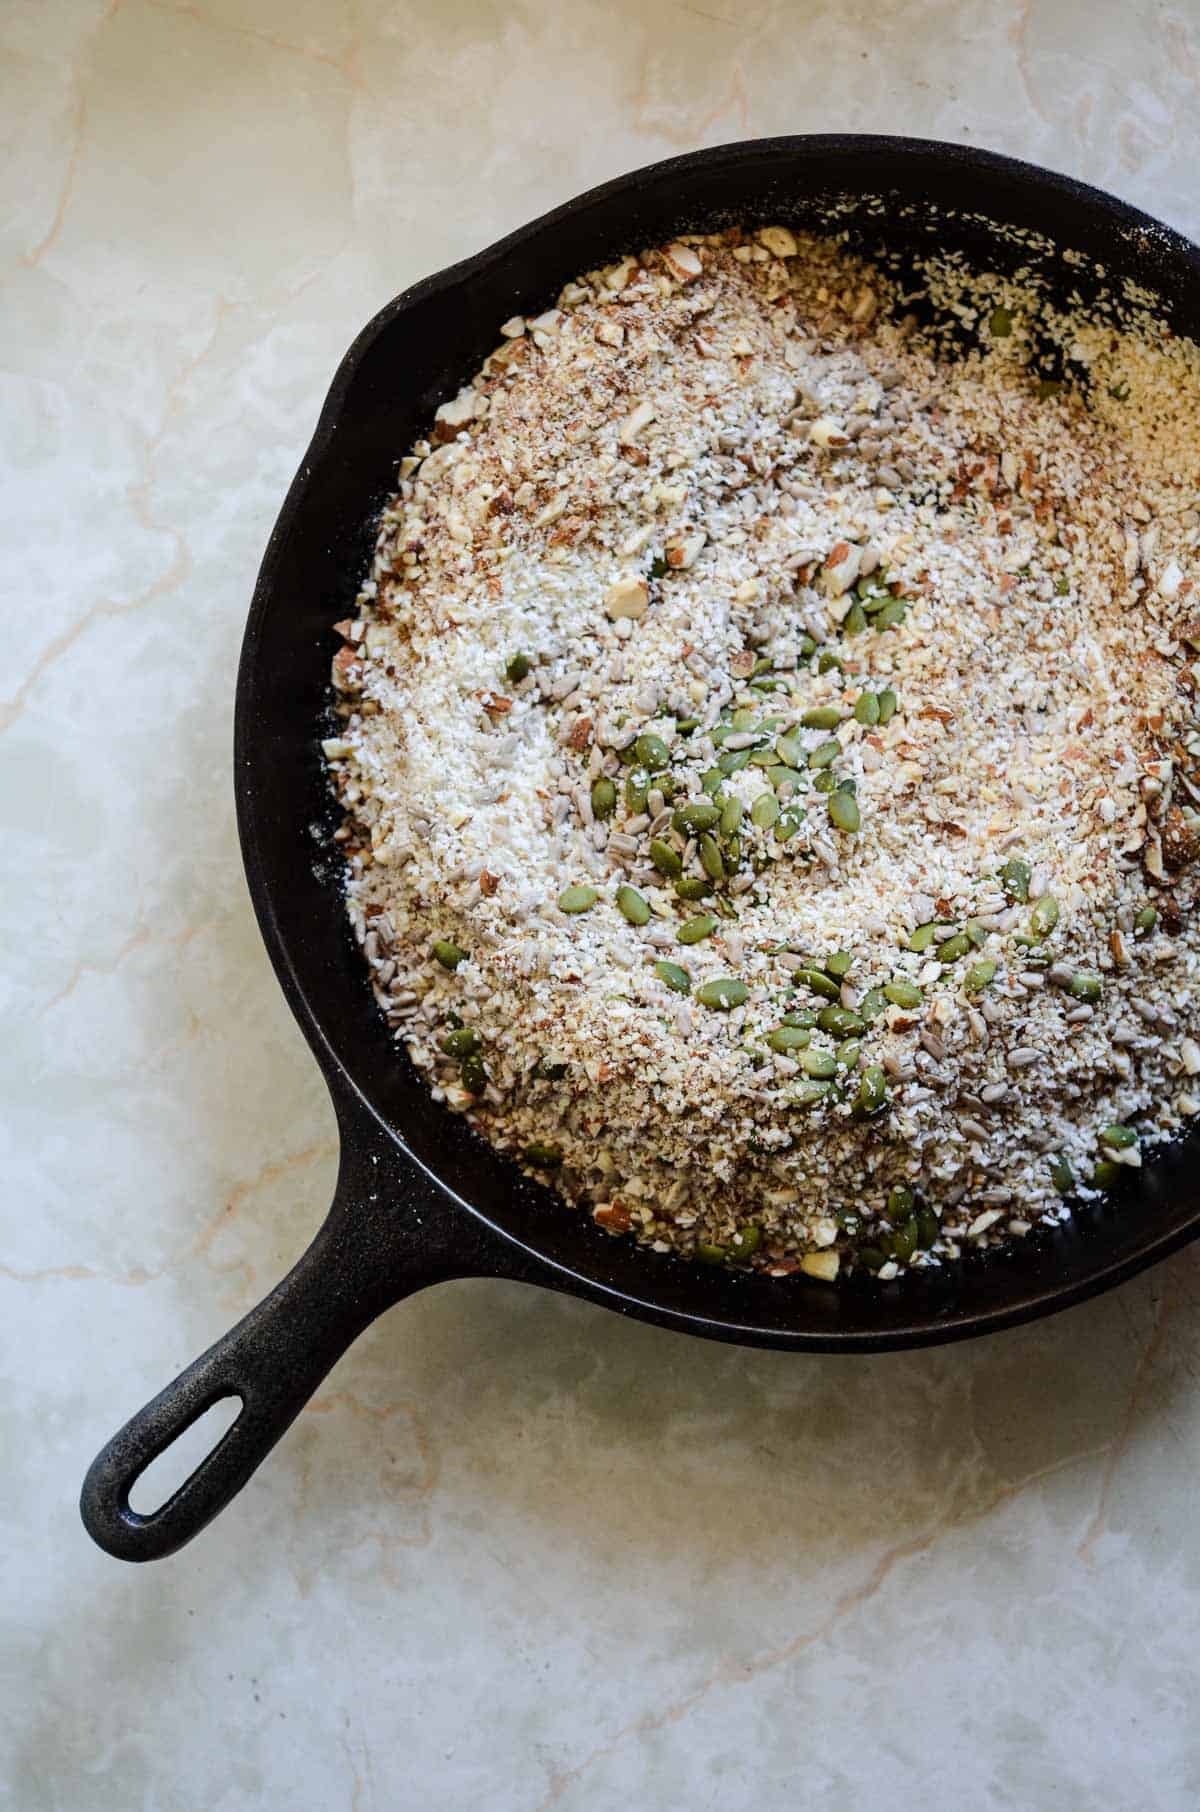 Fry pan with coconut, almonds, flax seeds, sunflower seeds, to toast.